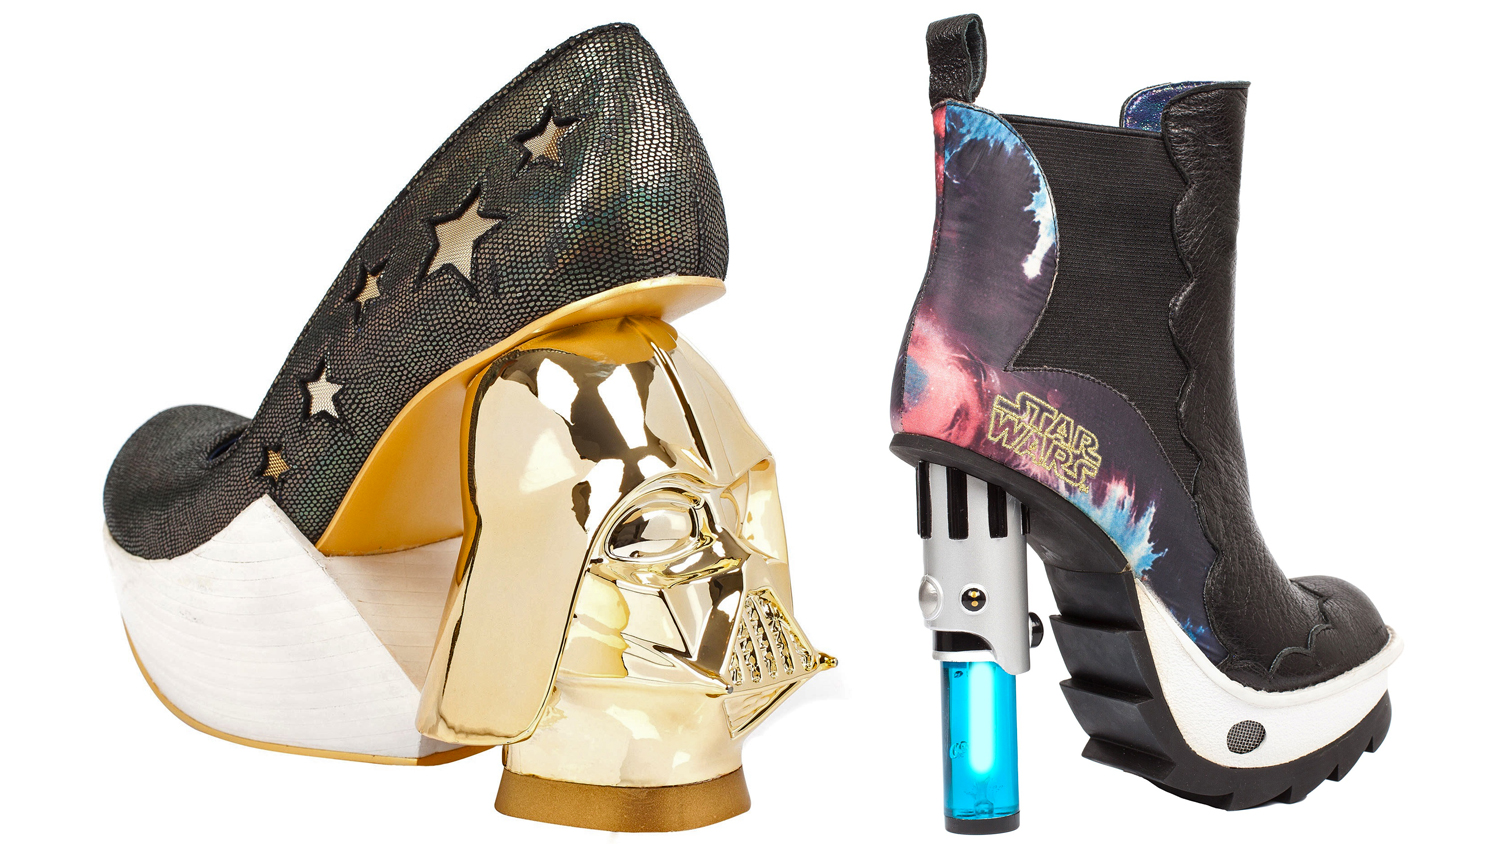 These Nightmarish Star Wars Shoes Sadly Exist In Our Galaxy, Not One Far, Far Away